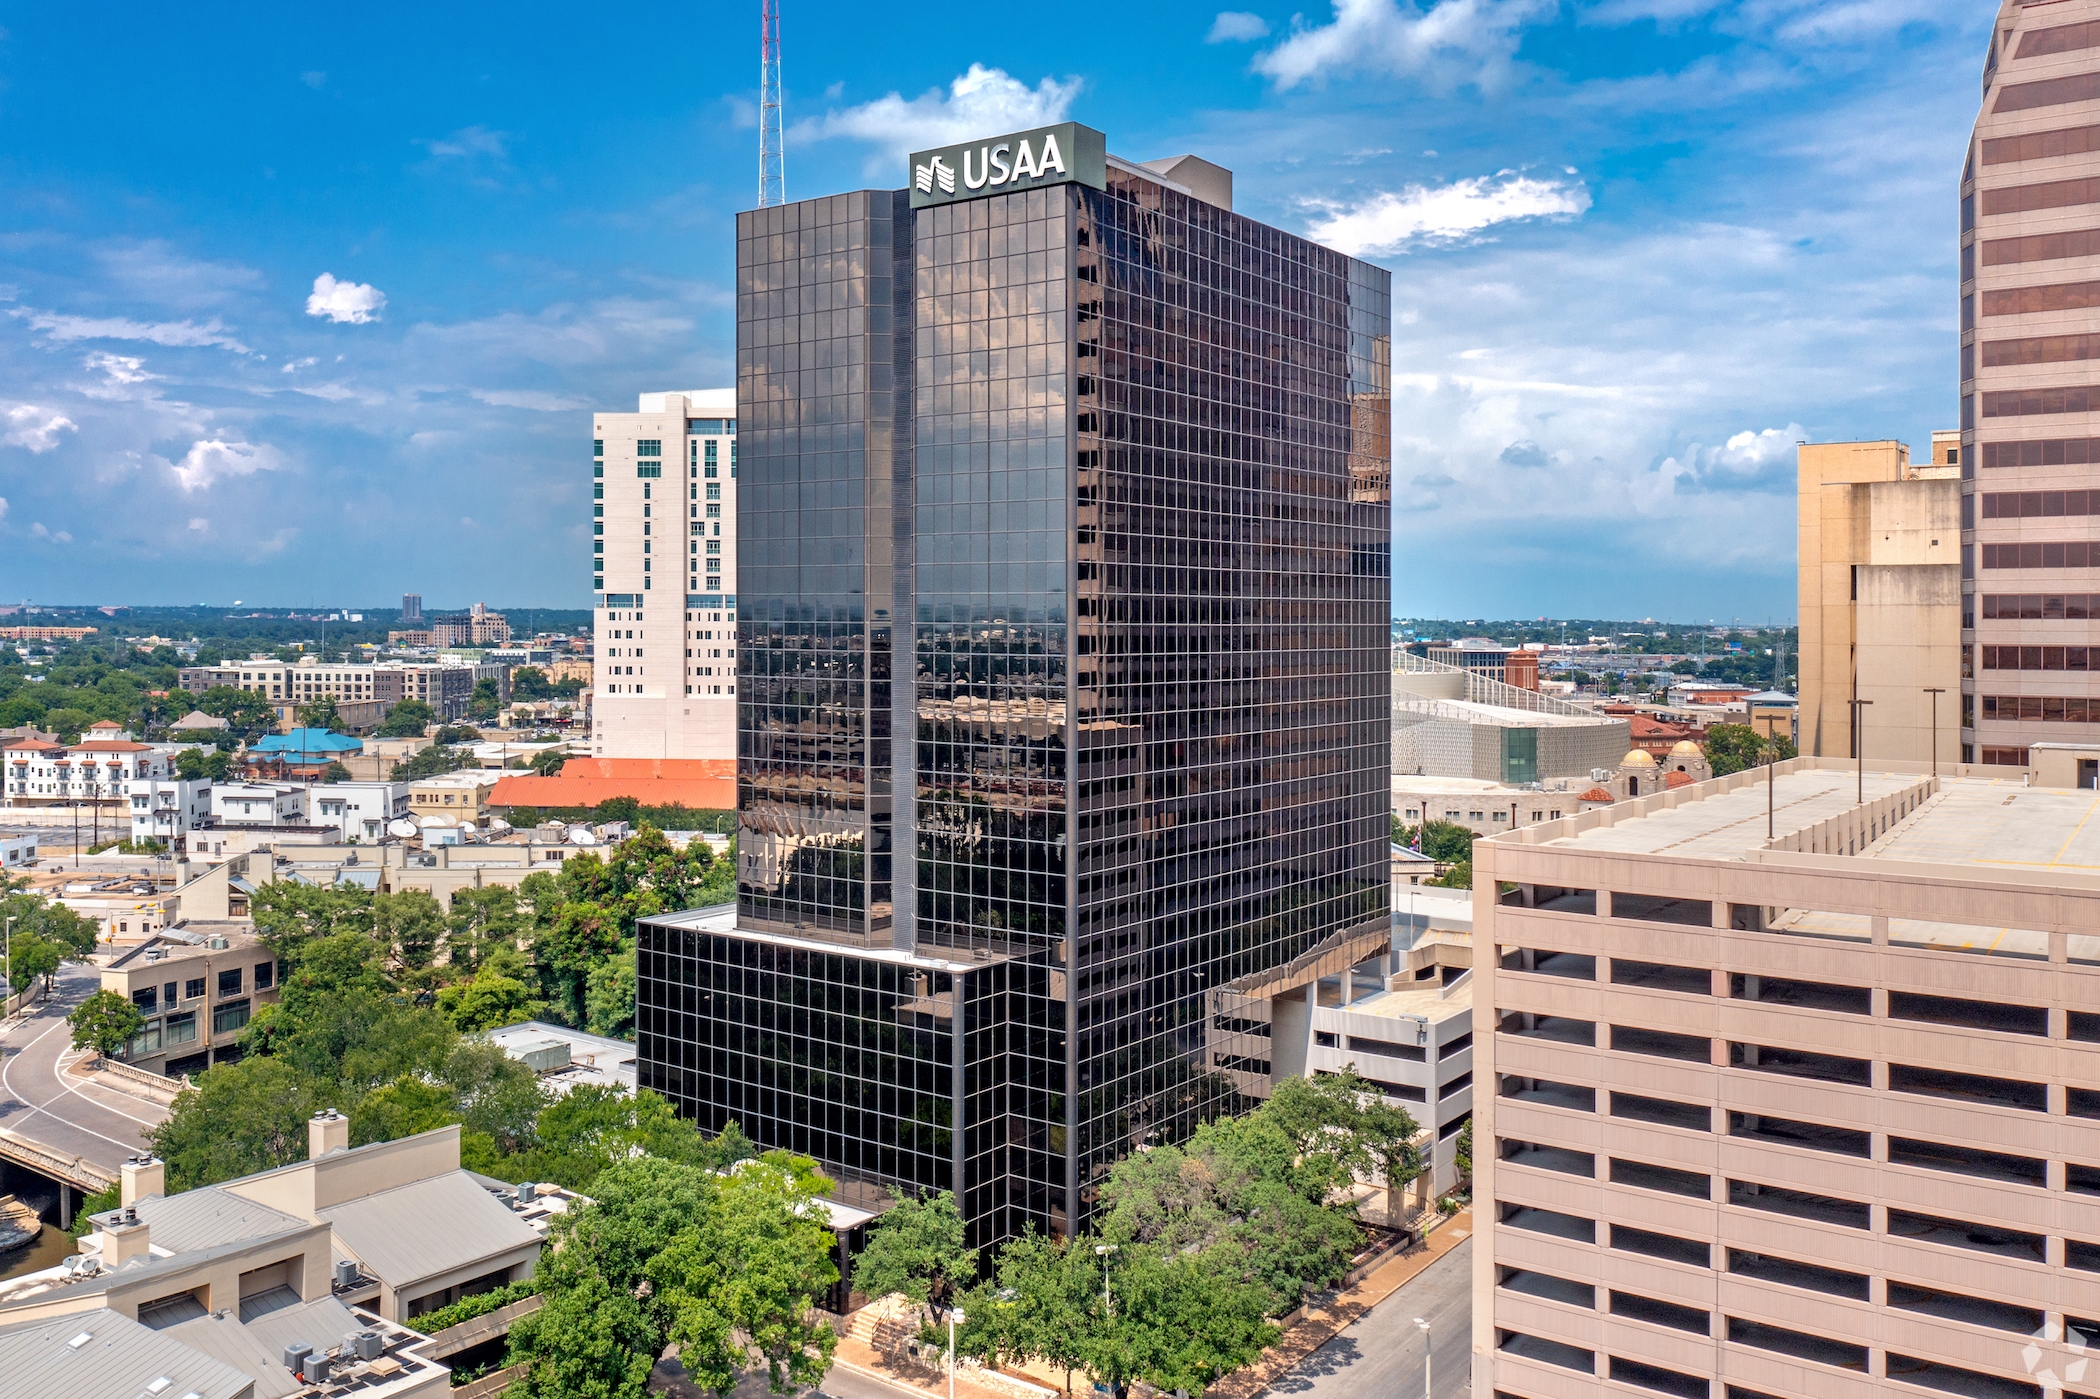 Insurance company USAA recently vacated two office towers it owns in downtown San Antonio, including  one at 700 North Saint Mary's St. (CoStar)